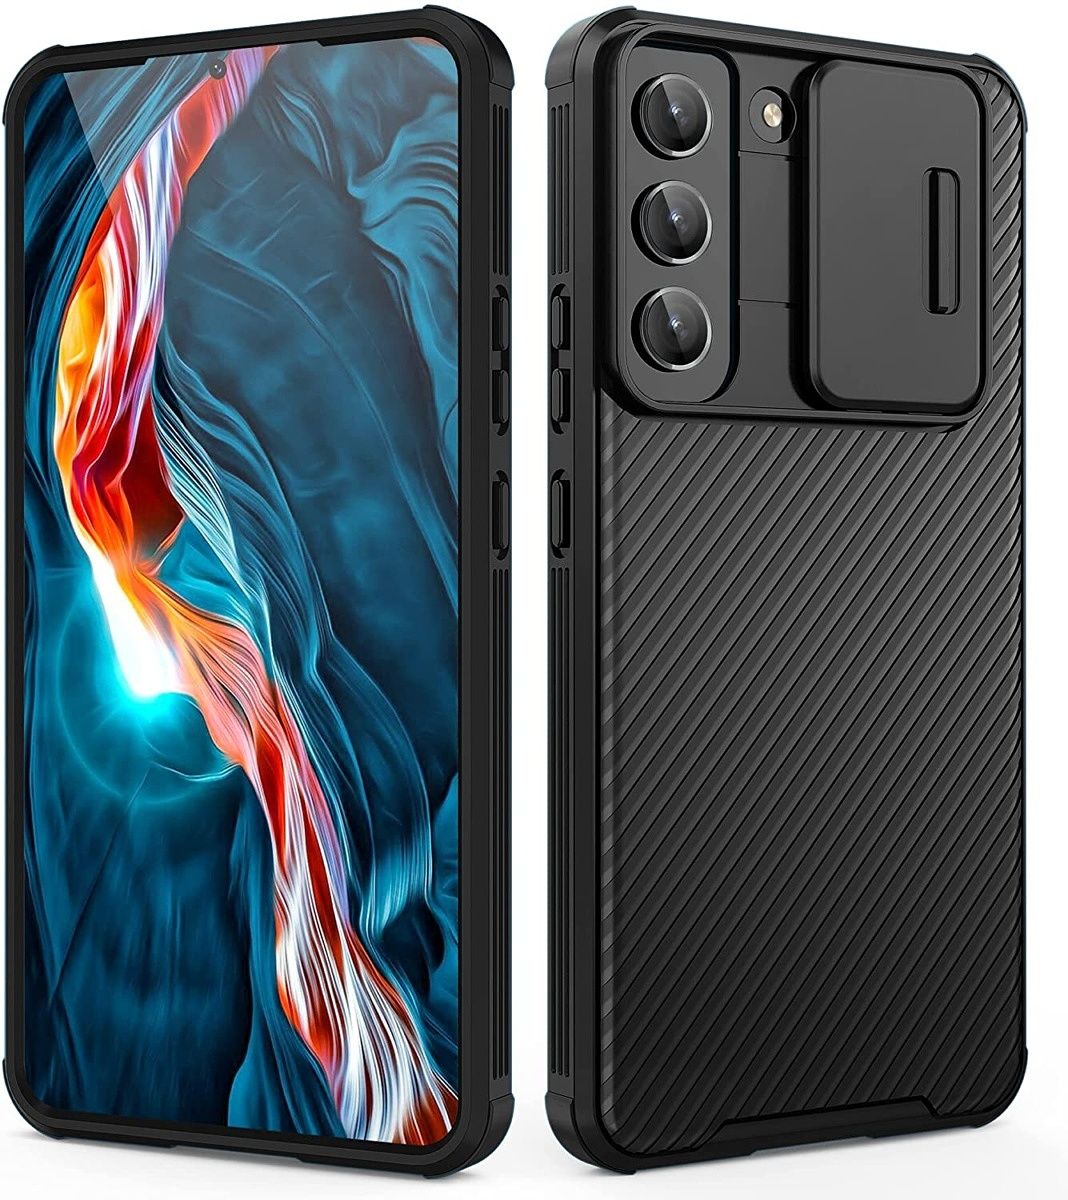 This rugged case from Doxlin not only keeps your Galaxy S22 Plus safe against drops and falls but also protects the camera with a built-in, slide-on lens cover. The case is wireless charging compatible and snugly fits your phone without adding too much bulk.